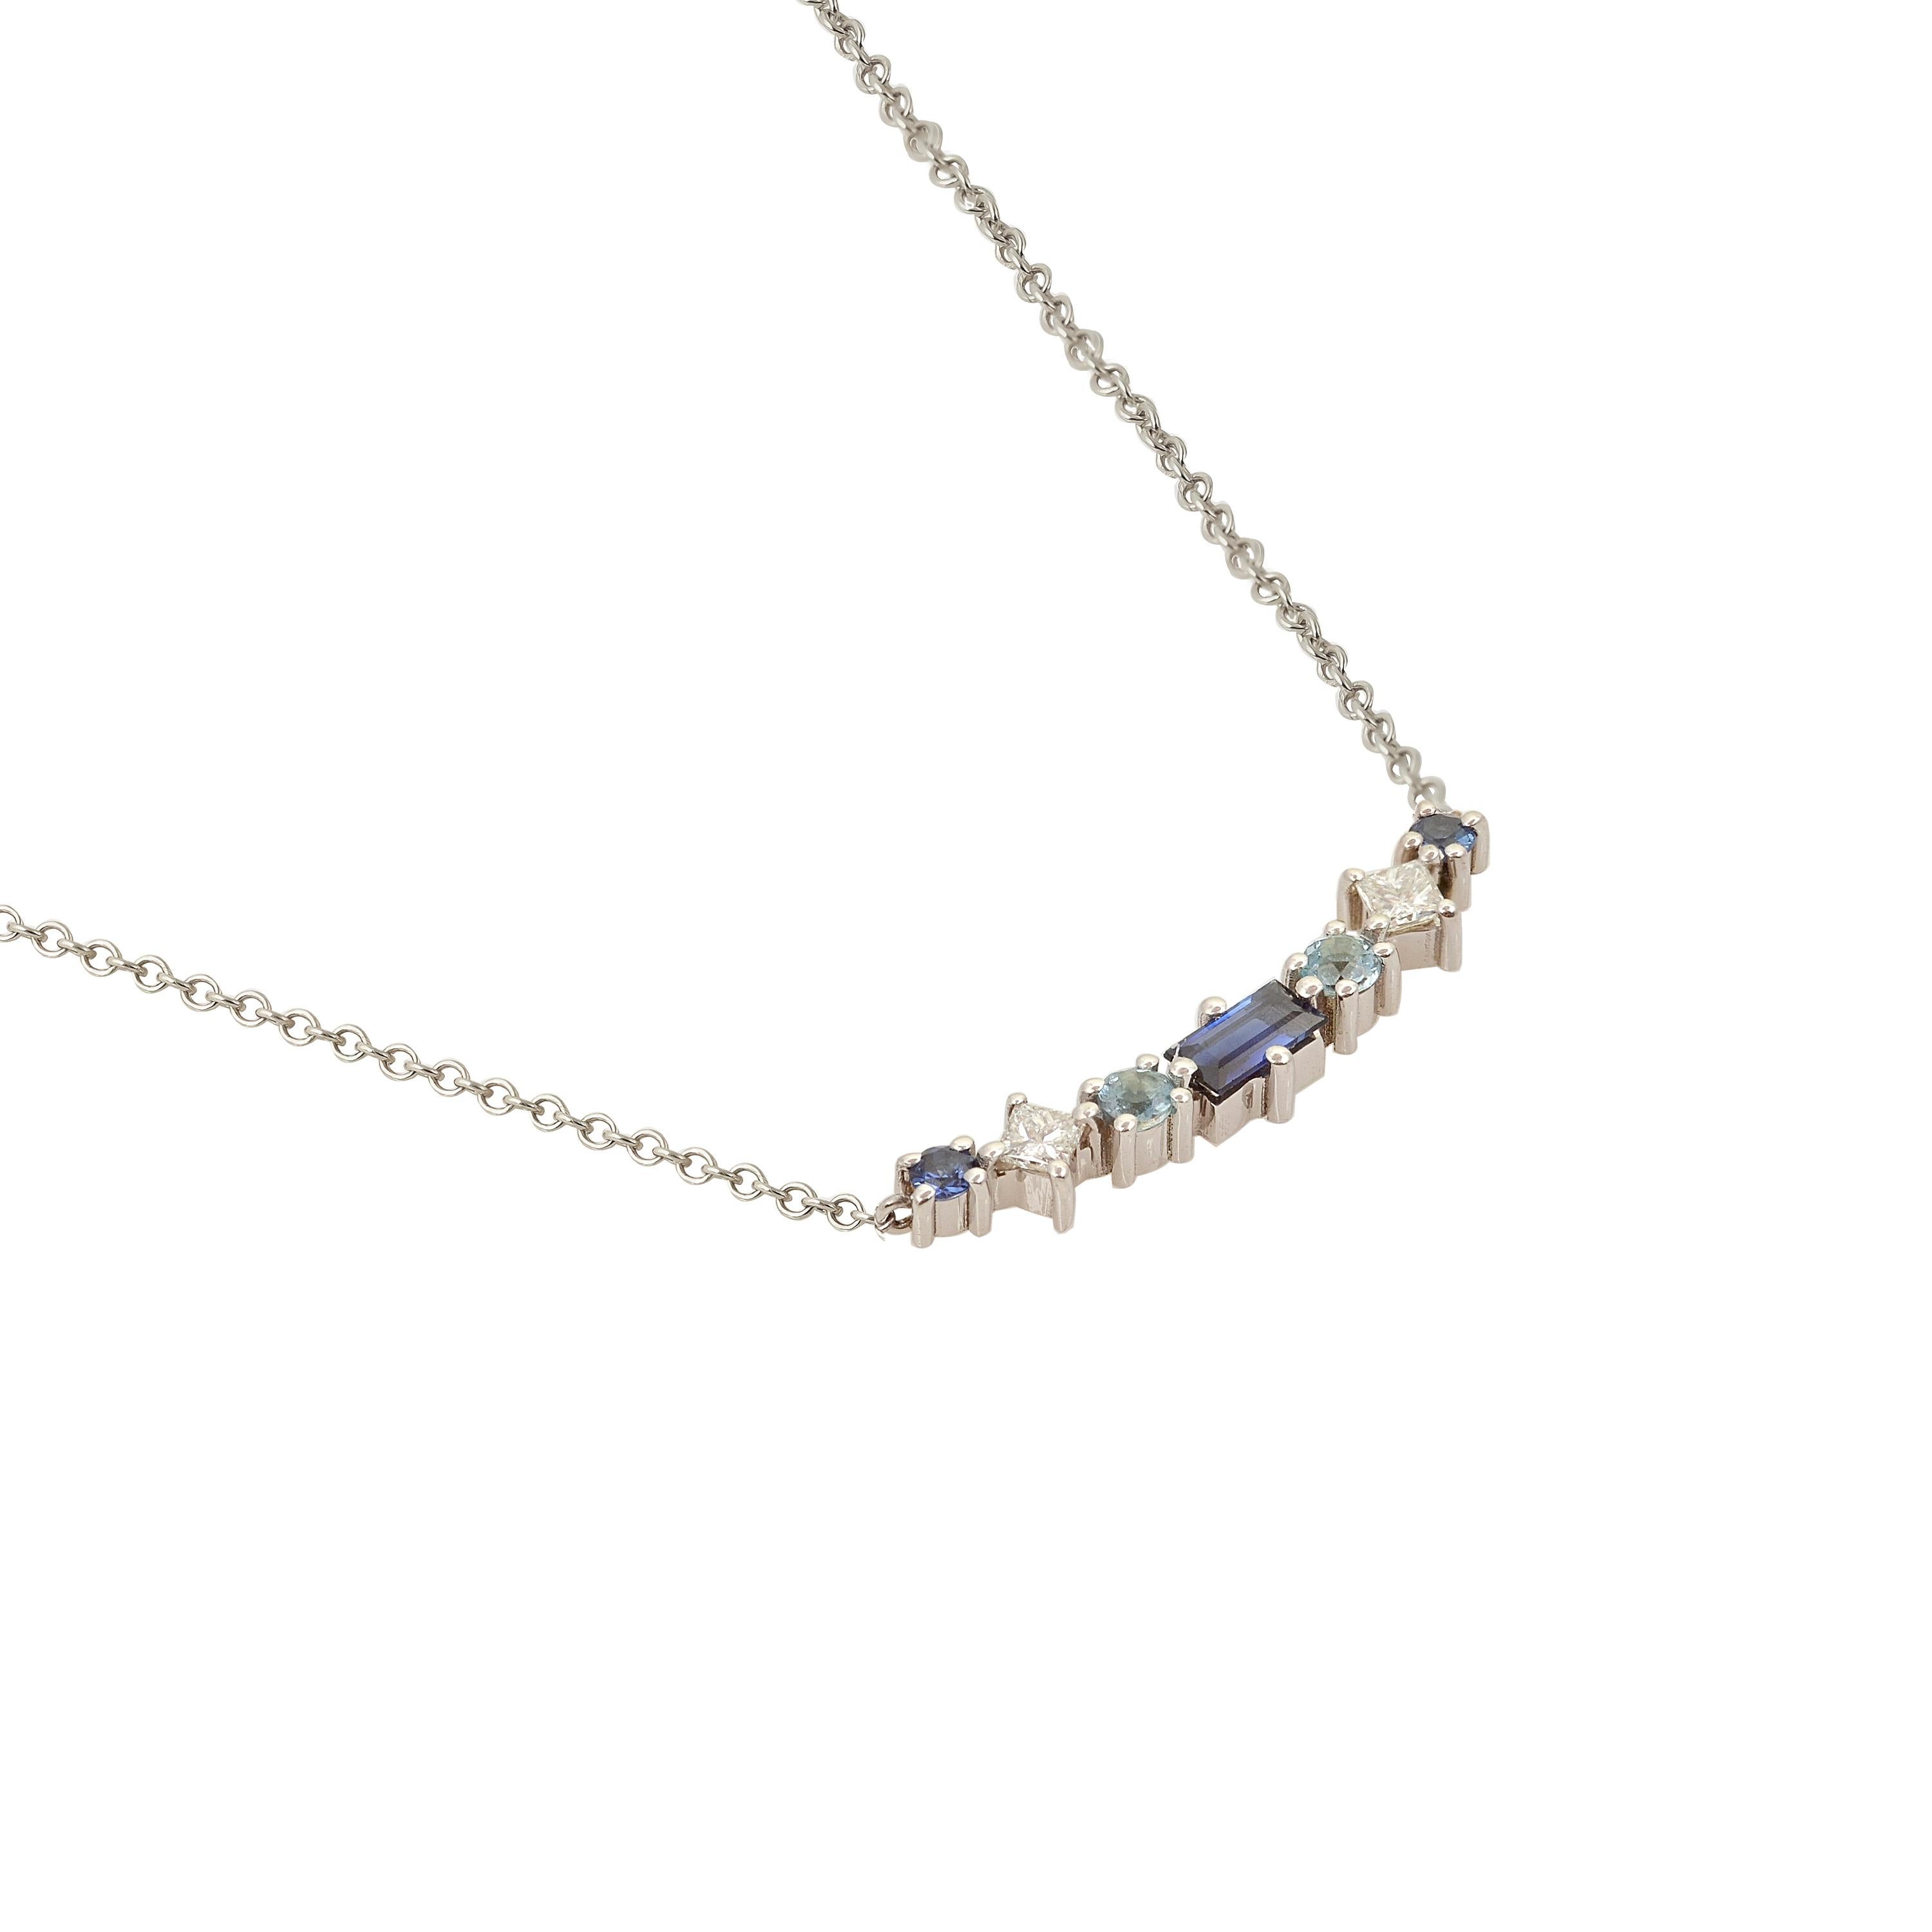 Designer: Alexia Gryllaki
Dimensions: L20x5mm, chain 420mm and a second link at 400mm
Weight: approximately 1.6g  
Barcode: OFS026

Multi-stone necklace in 18 karat white, yellow or rose gold with baguette and round faceted sapphires approx.